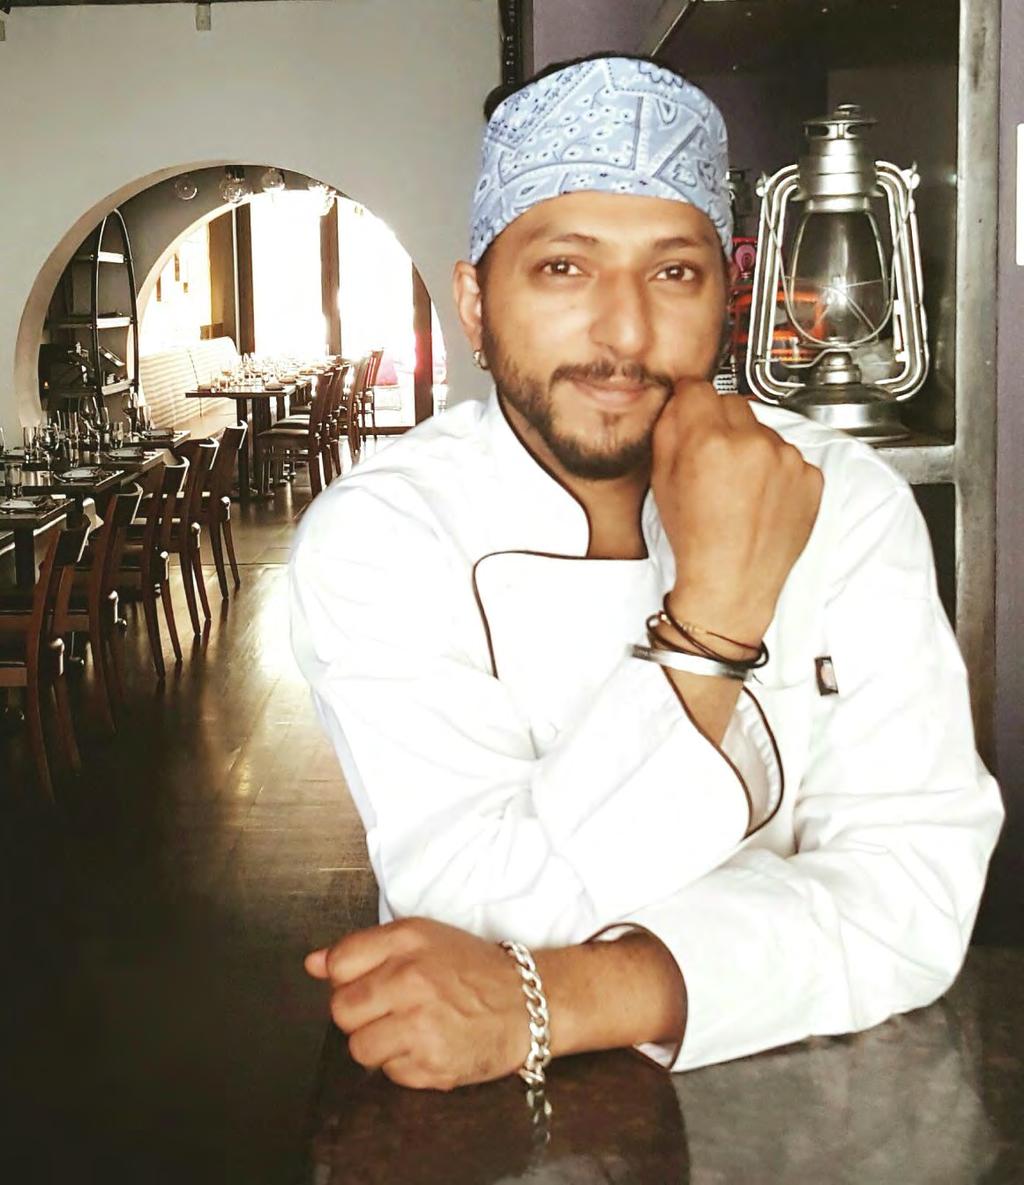 E X E C U T I V E C H E F BINDER SAINI Originally seeing himself working as an actor and dancer in the moviemaking and entertainment industry, Binder Saini's early involvement in restaurants ignited